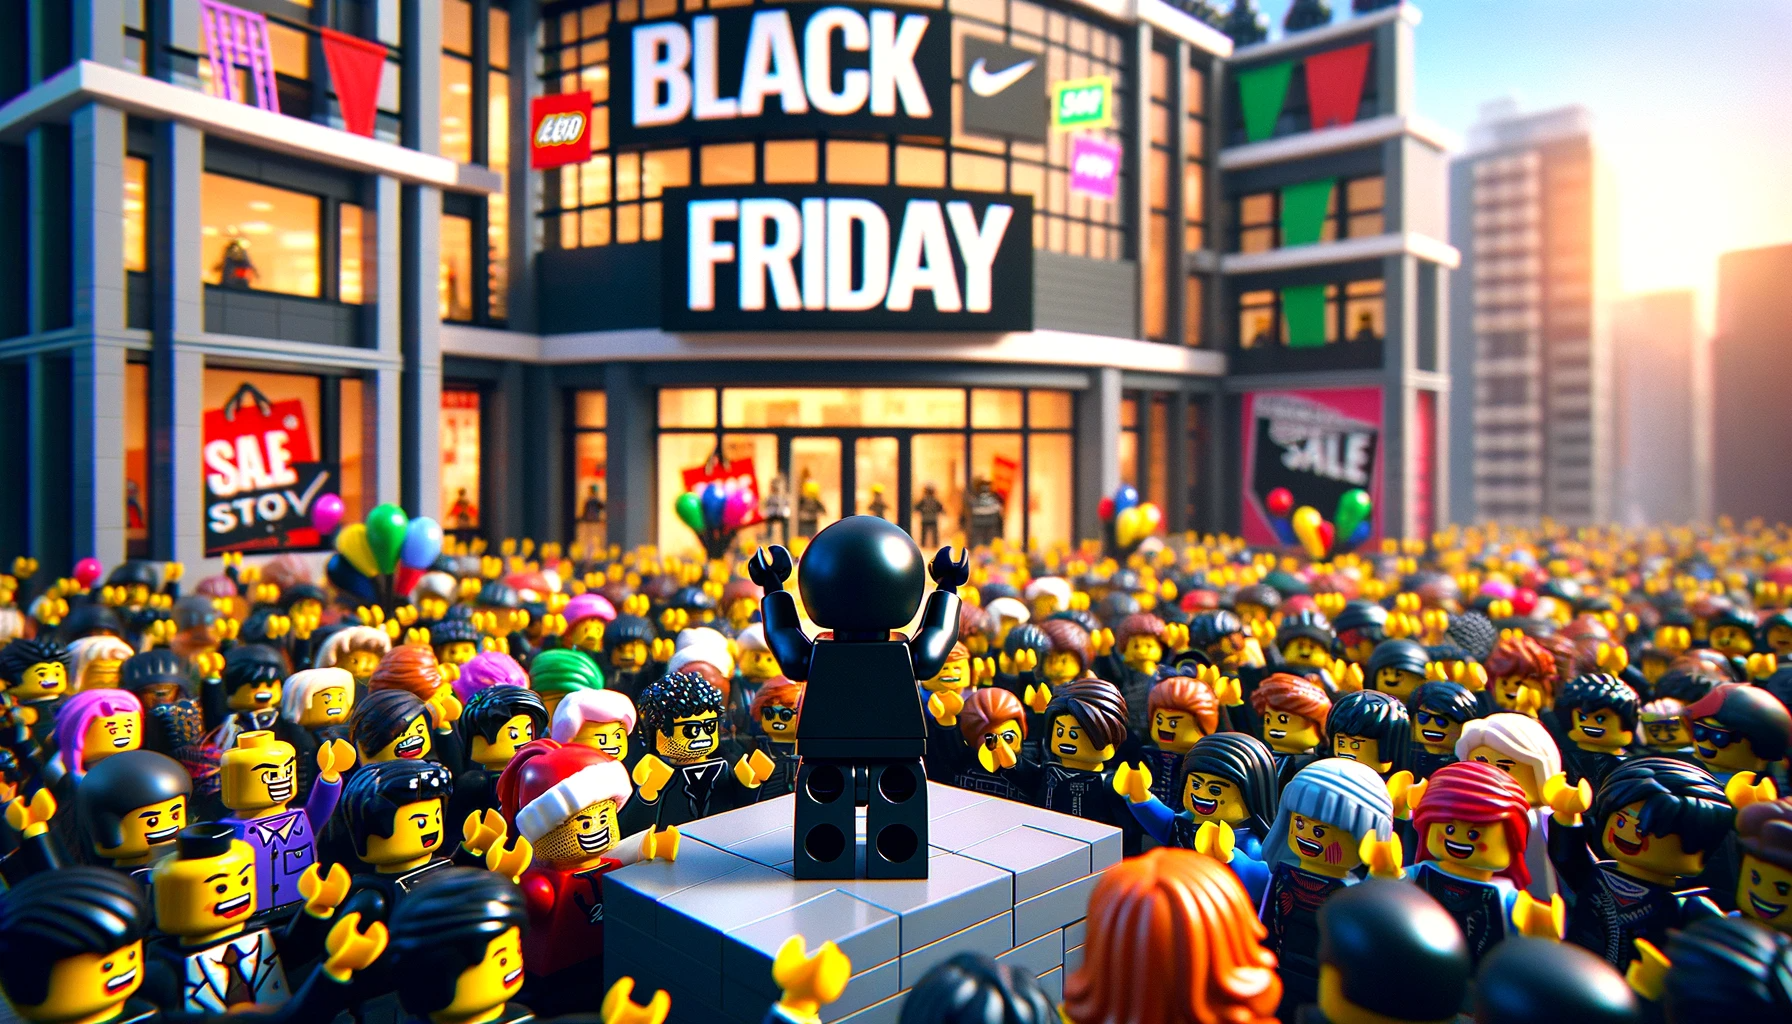 Black Friday : an opportunity for Startup Growth